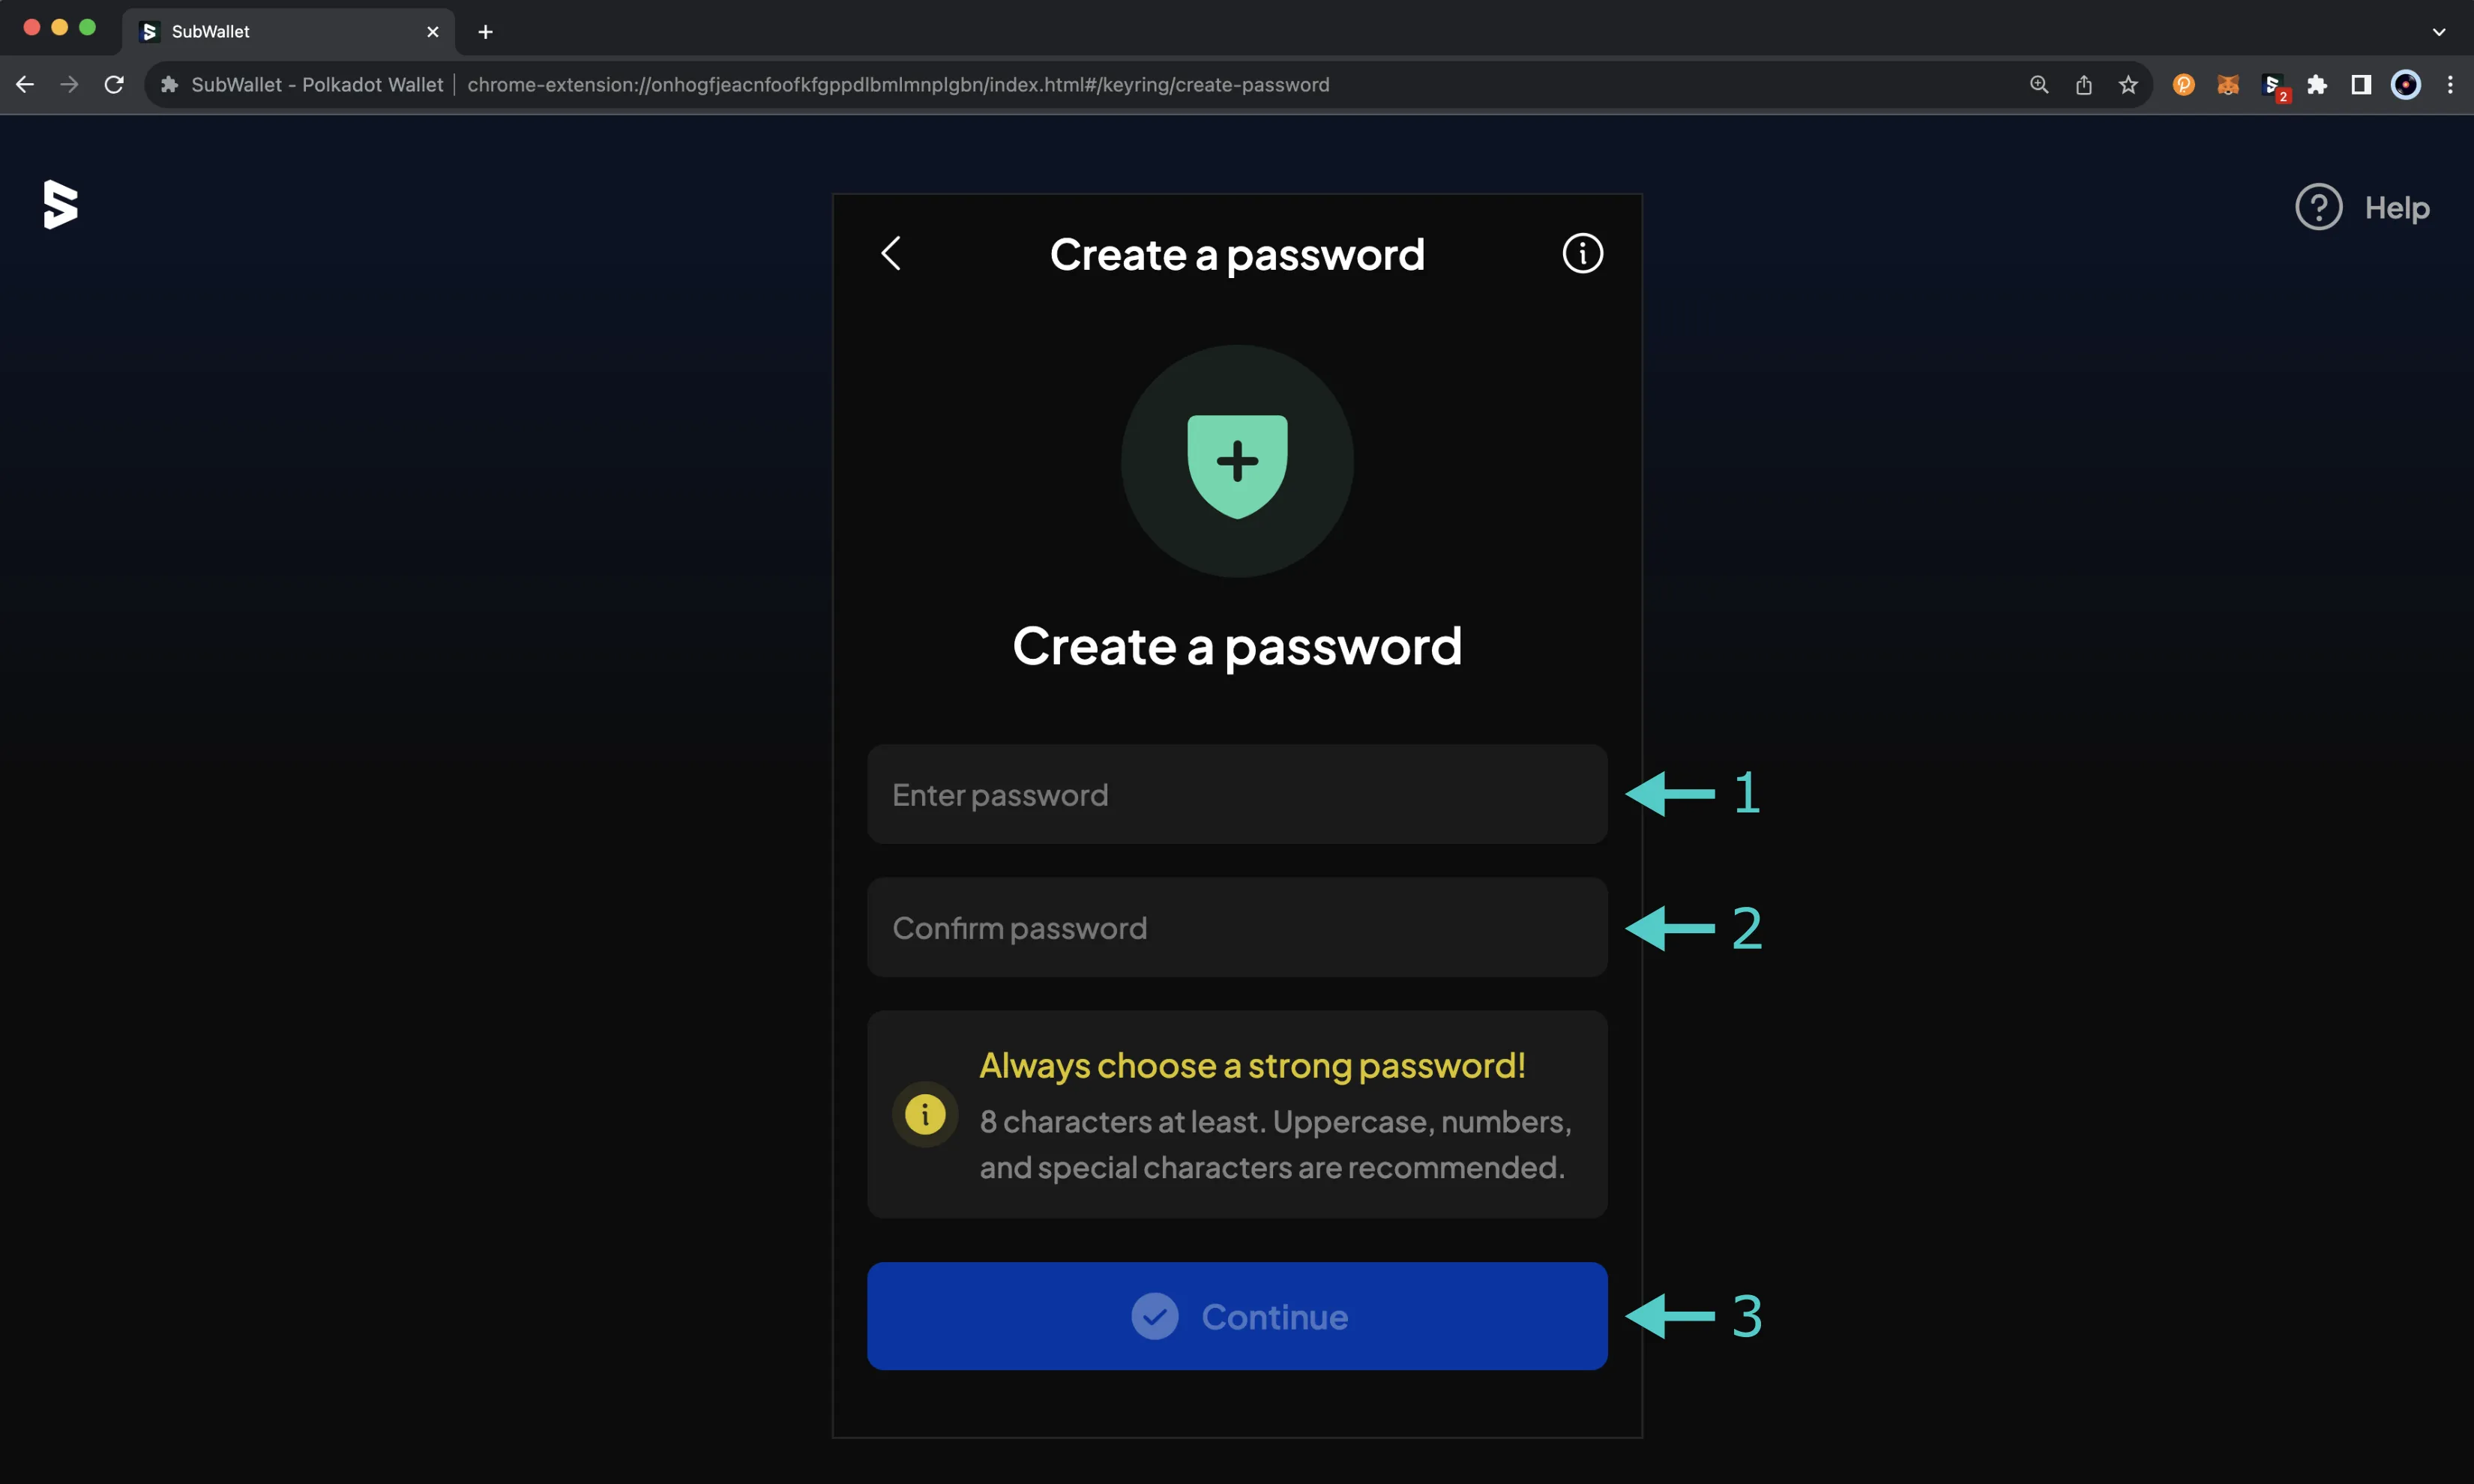 The create a password screen on the SubWallet browser extension.